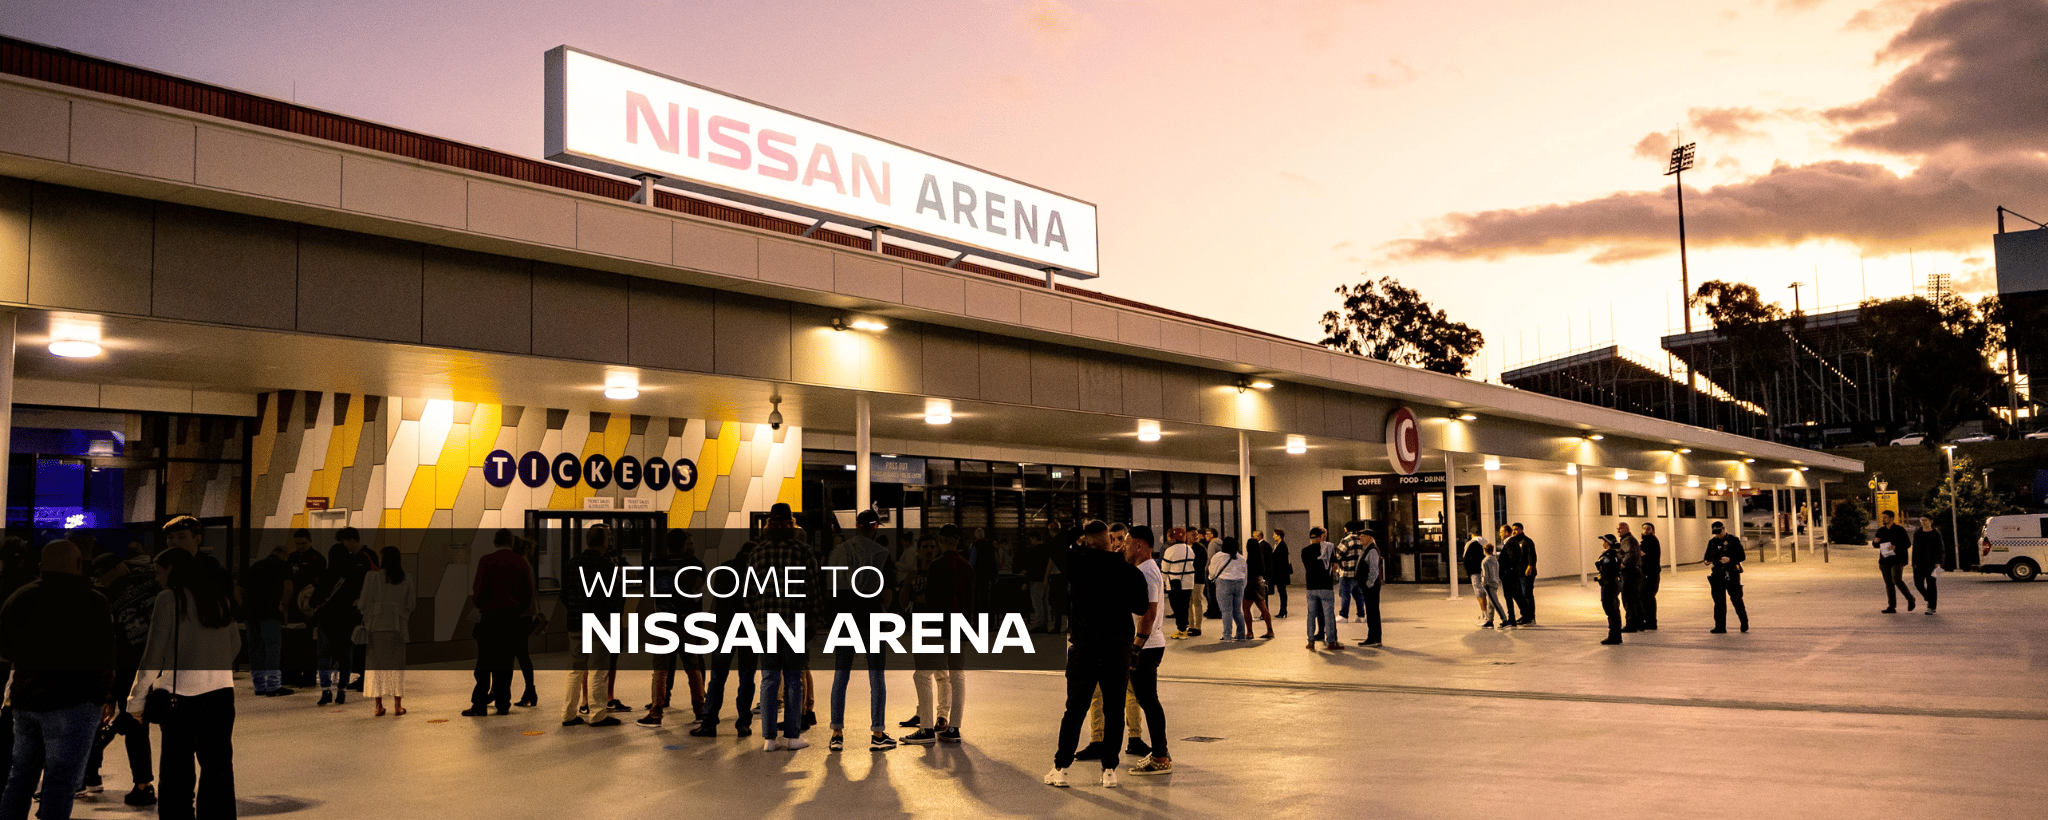 Image of Nissan Arena at sunset